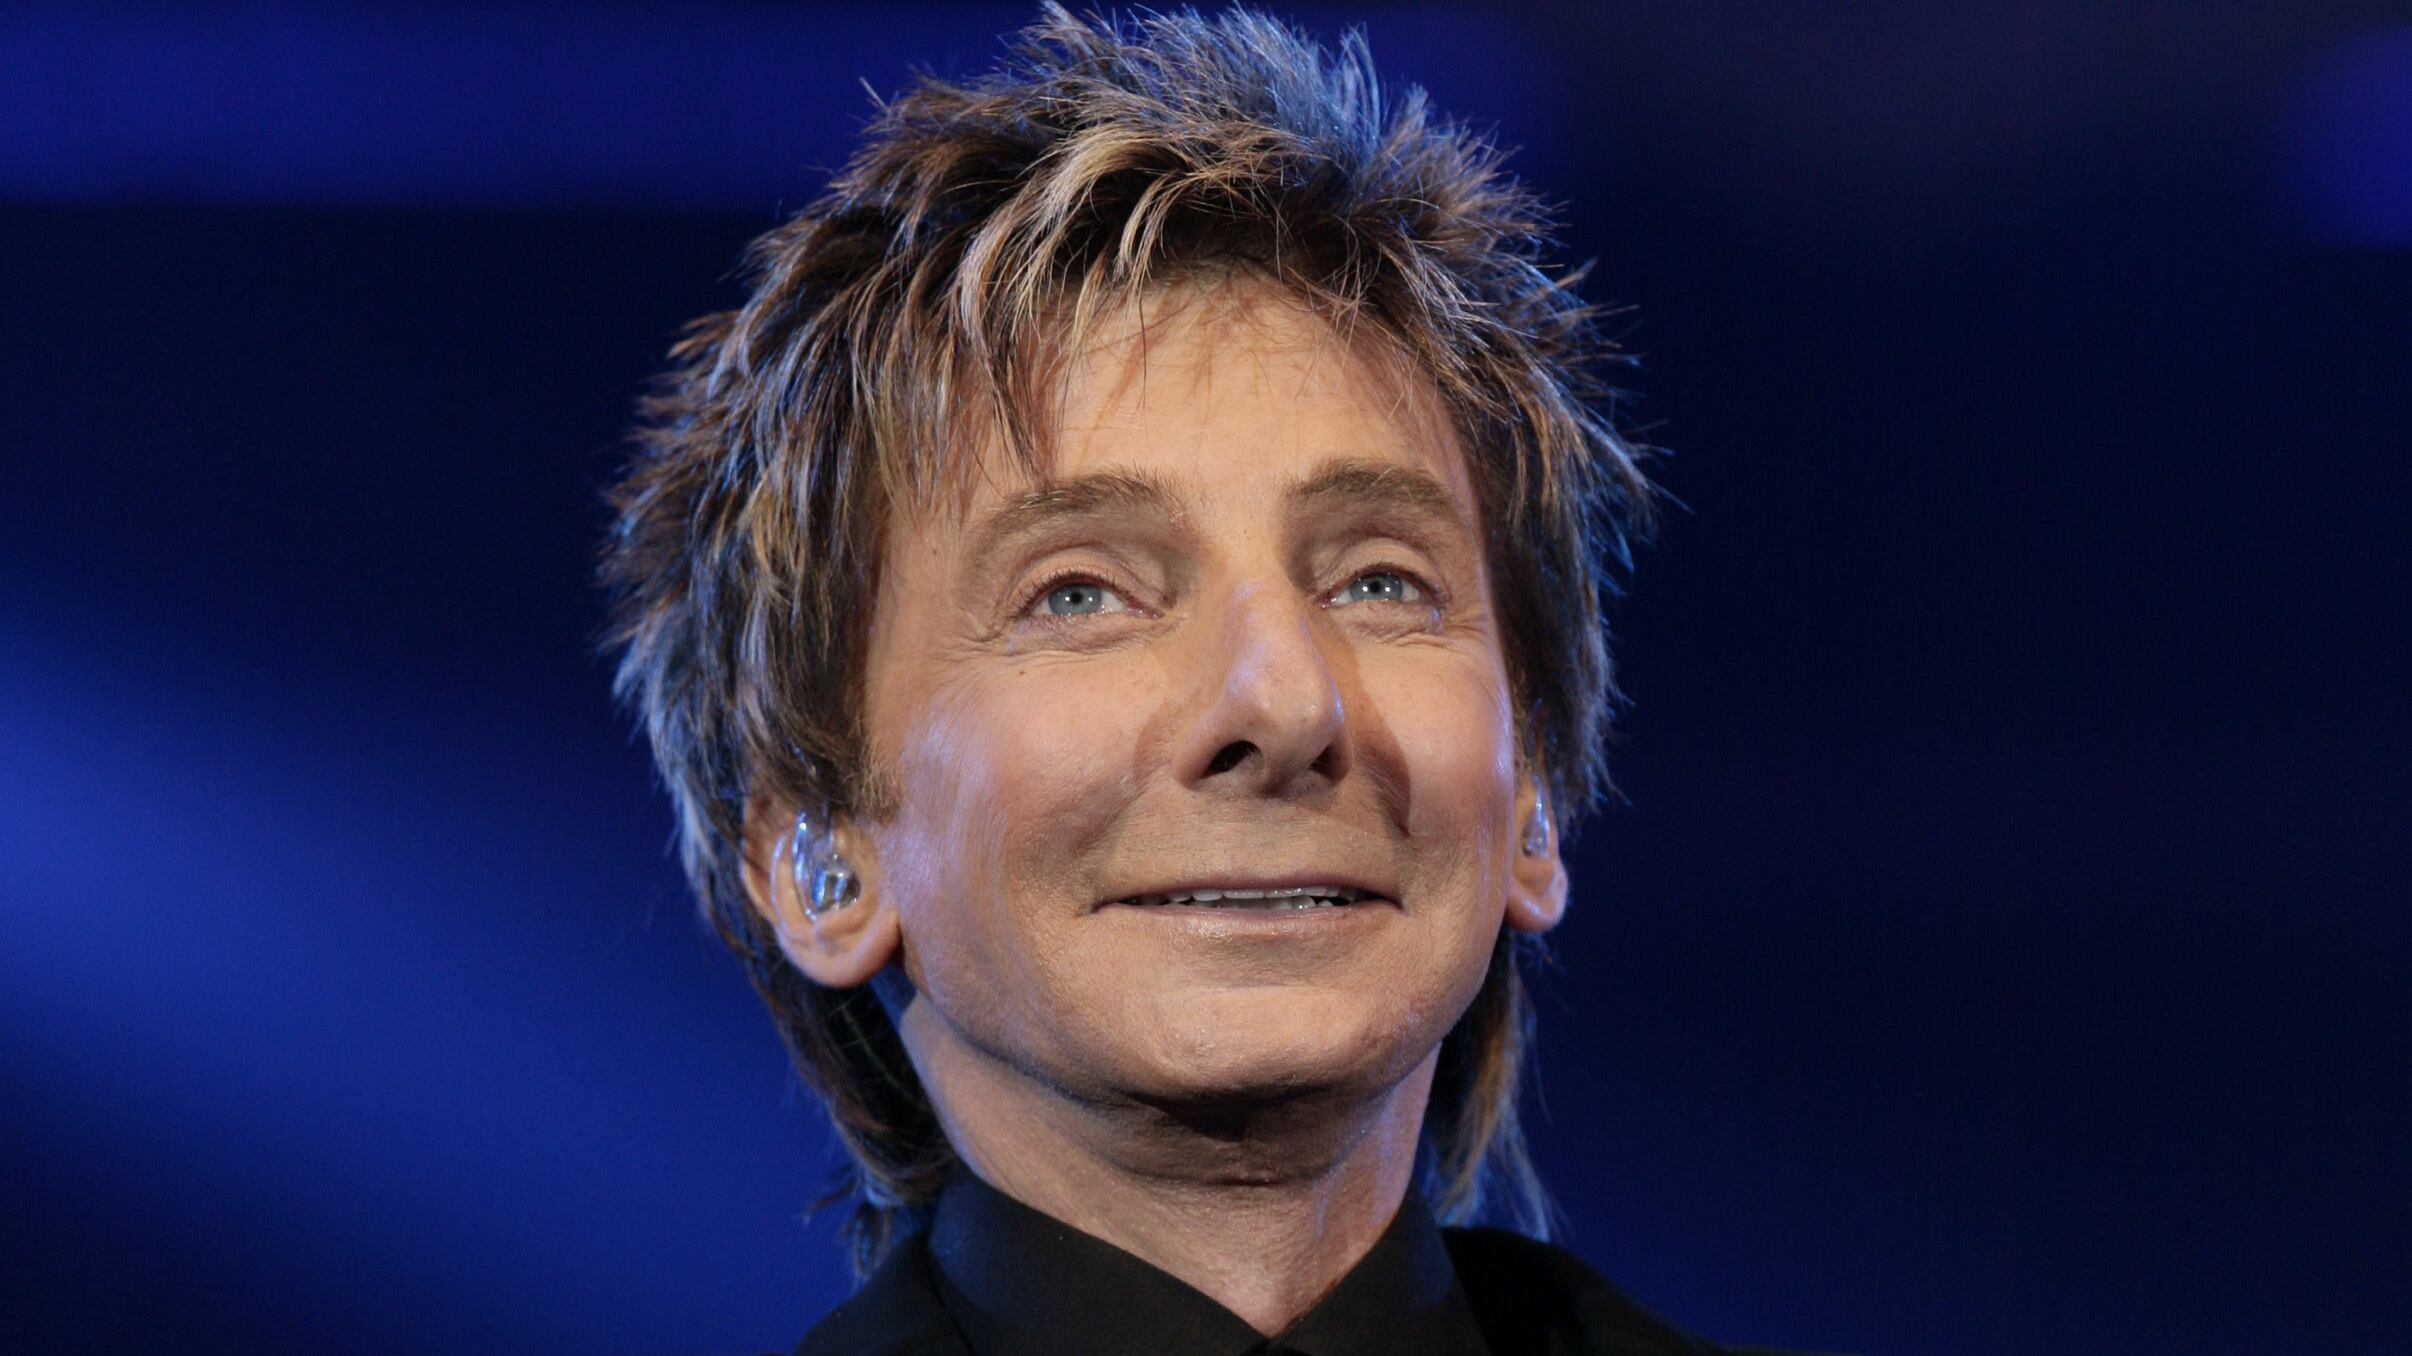 Barry Manilow has booked the AO Arena as a back up if Co-op Live is not ready